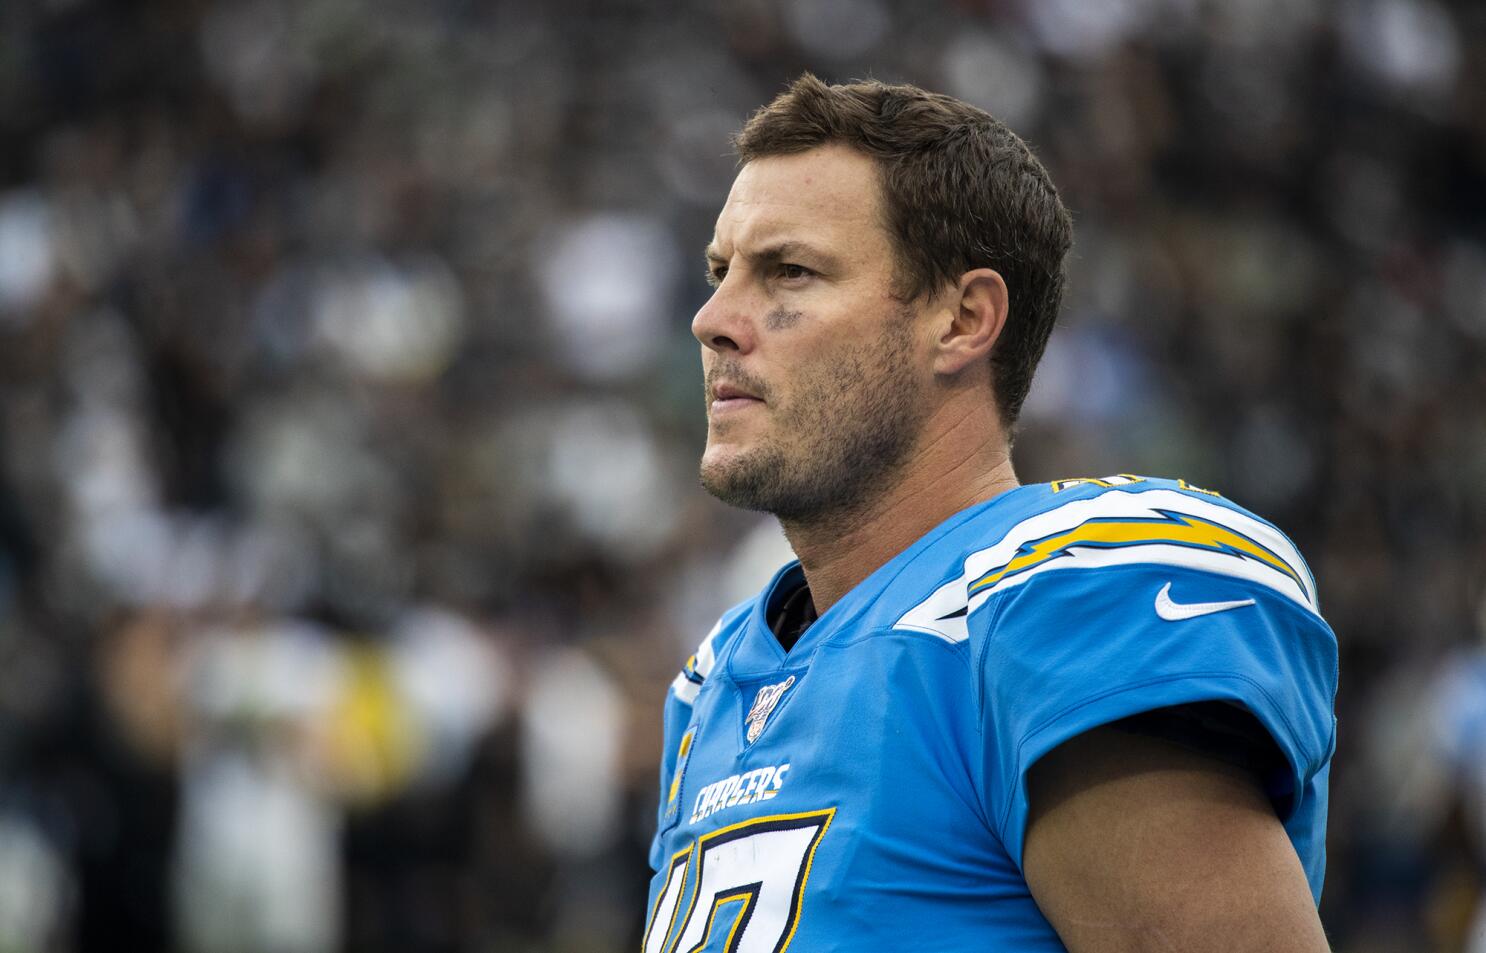 Here's why the Chargers should not re-sign Philip Rivers - Los Angeles Times